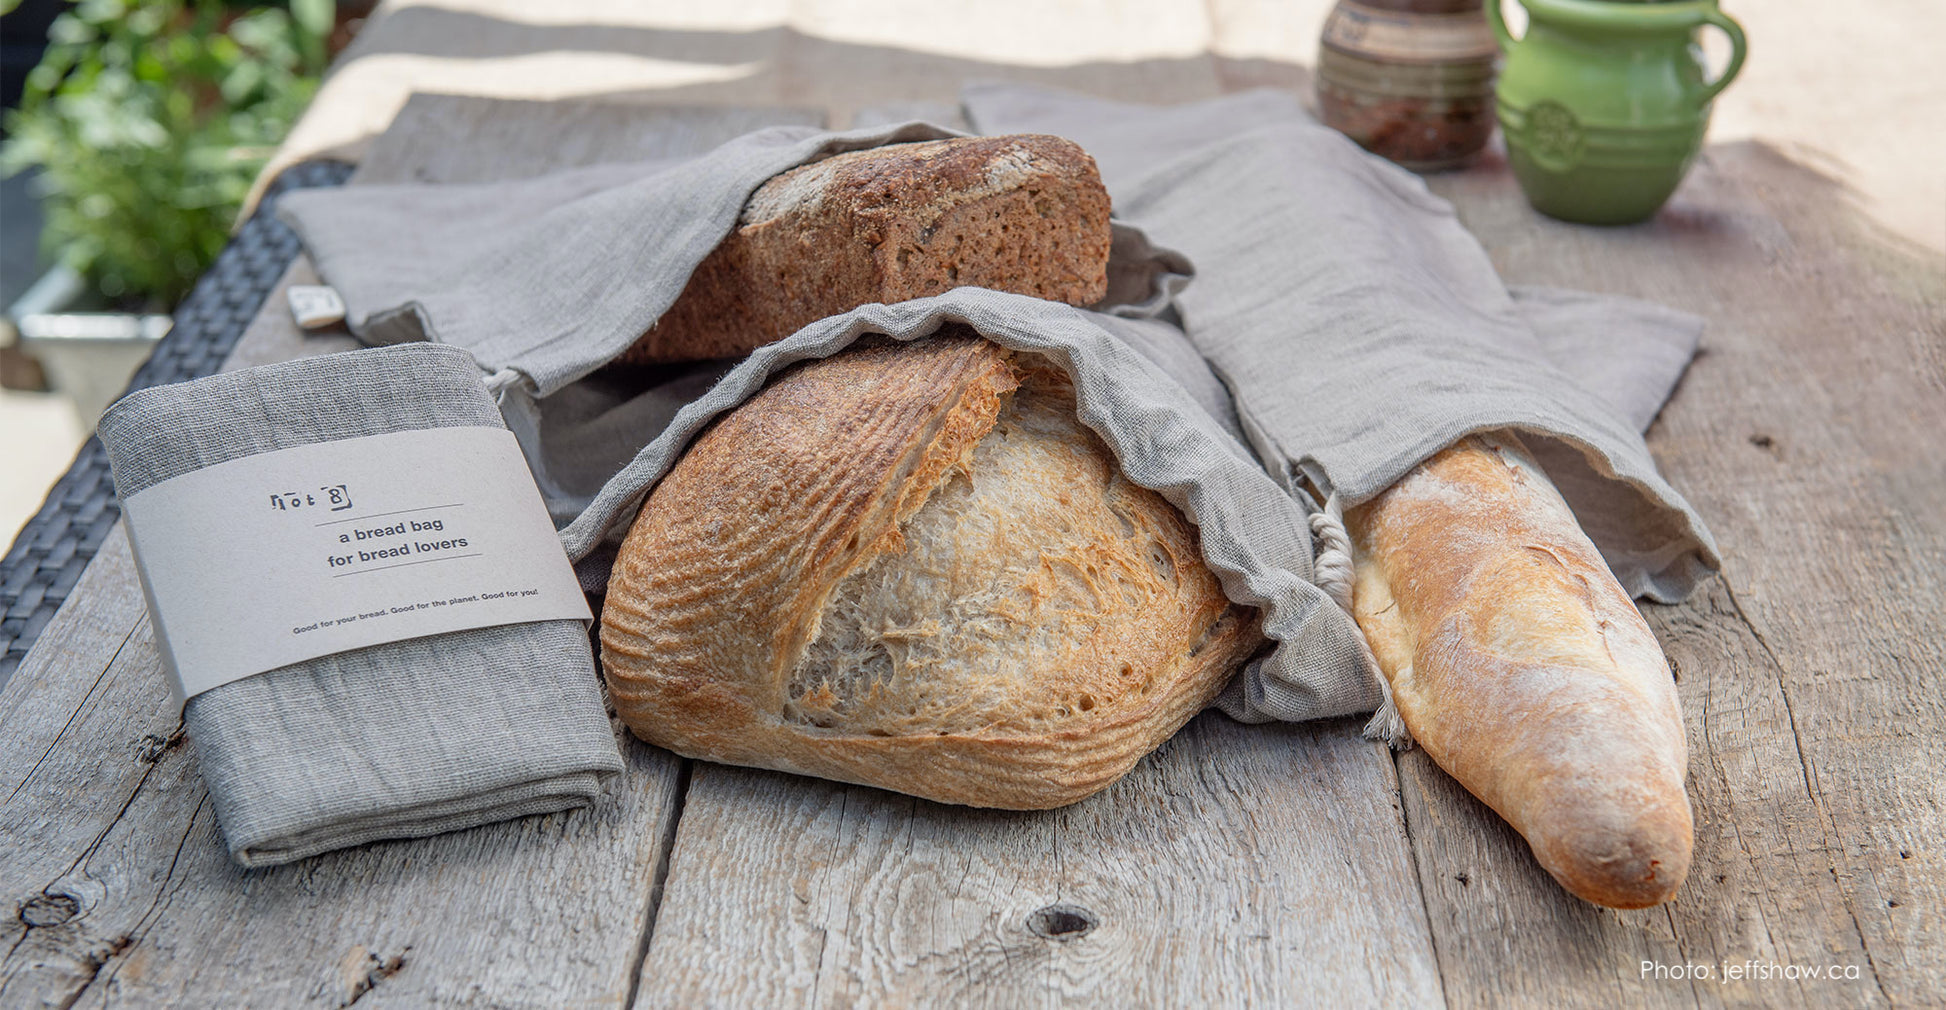 Rustic loaves in 3 sizes are nestled into linen bread bags and lay on top of a rustic wooden table top. One packaged bread bag sits in the foreground